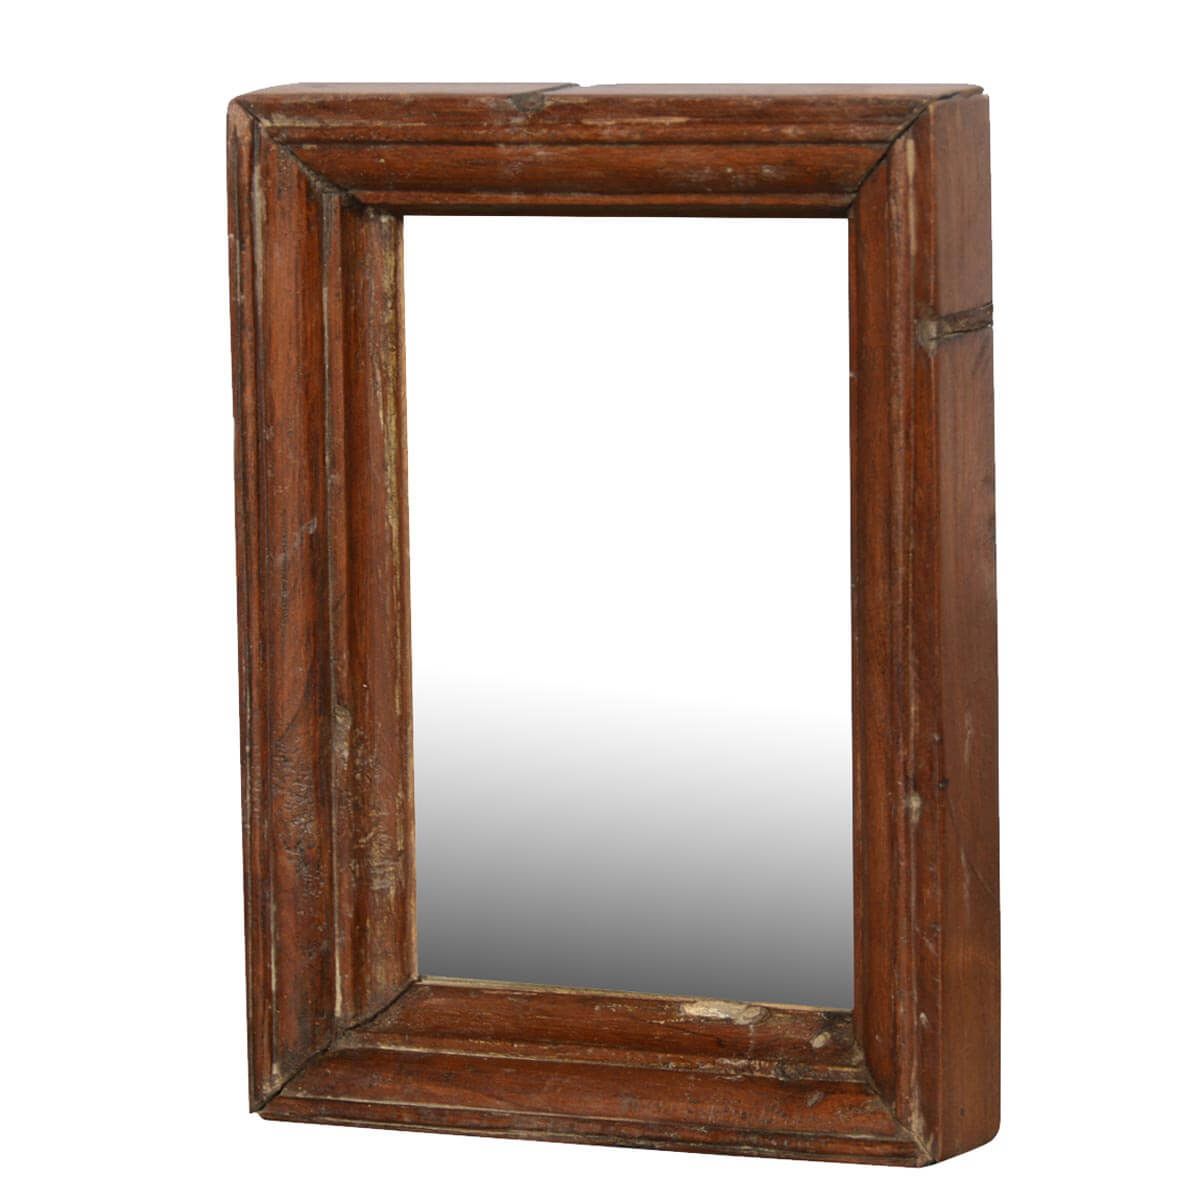 Rustic Farmhouse Reclaimed Wood Handmade Wall Mirror Frame Inside Rustic Wood Wall Mirrors (View 4 of 15)